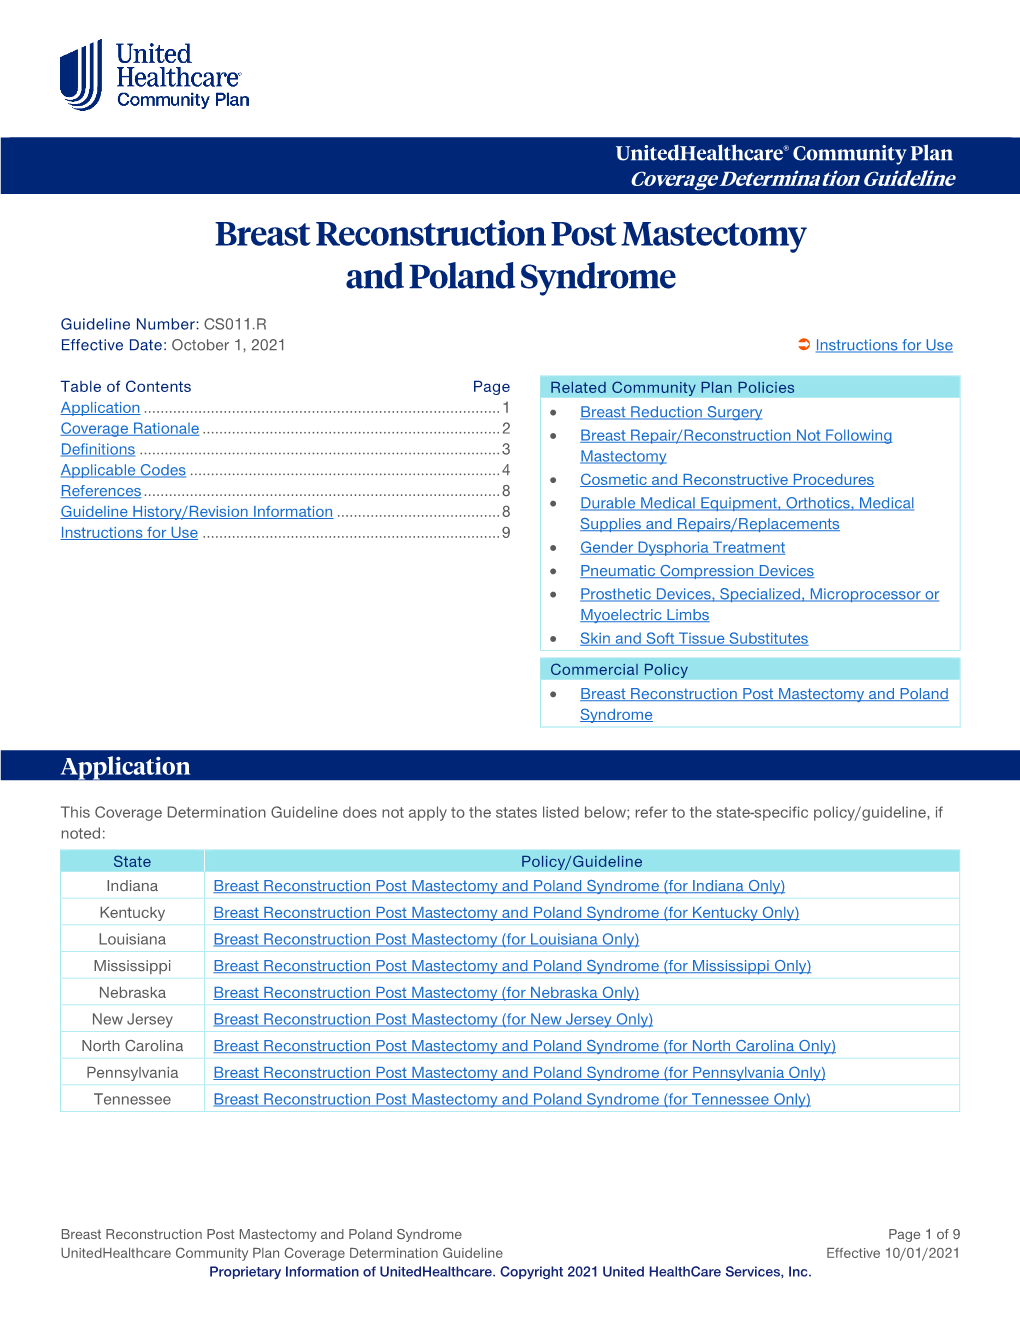 Breast Reconstruction Post Mastectomy and Poland Syndrome